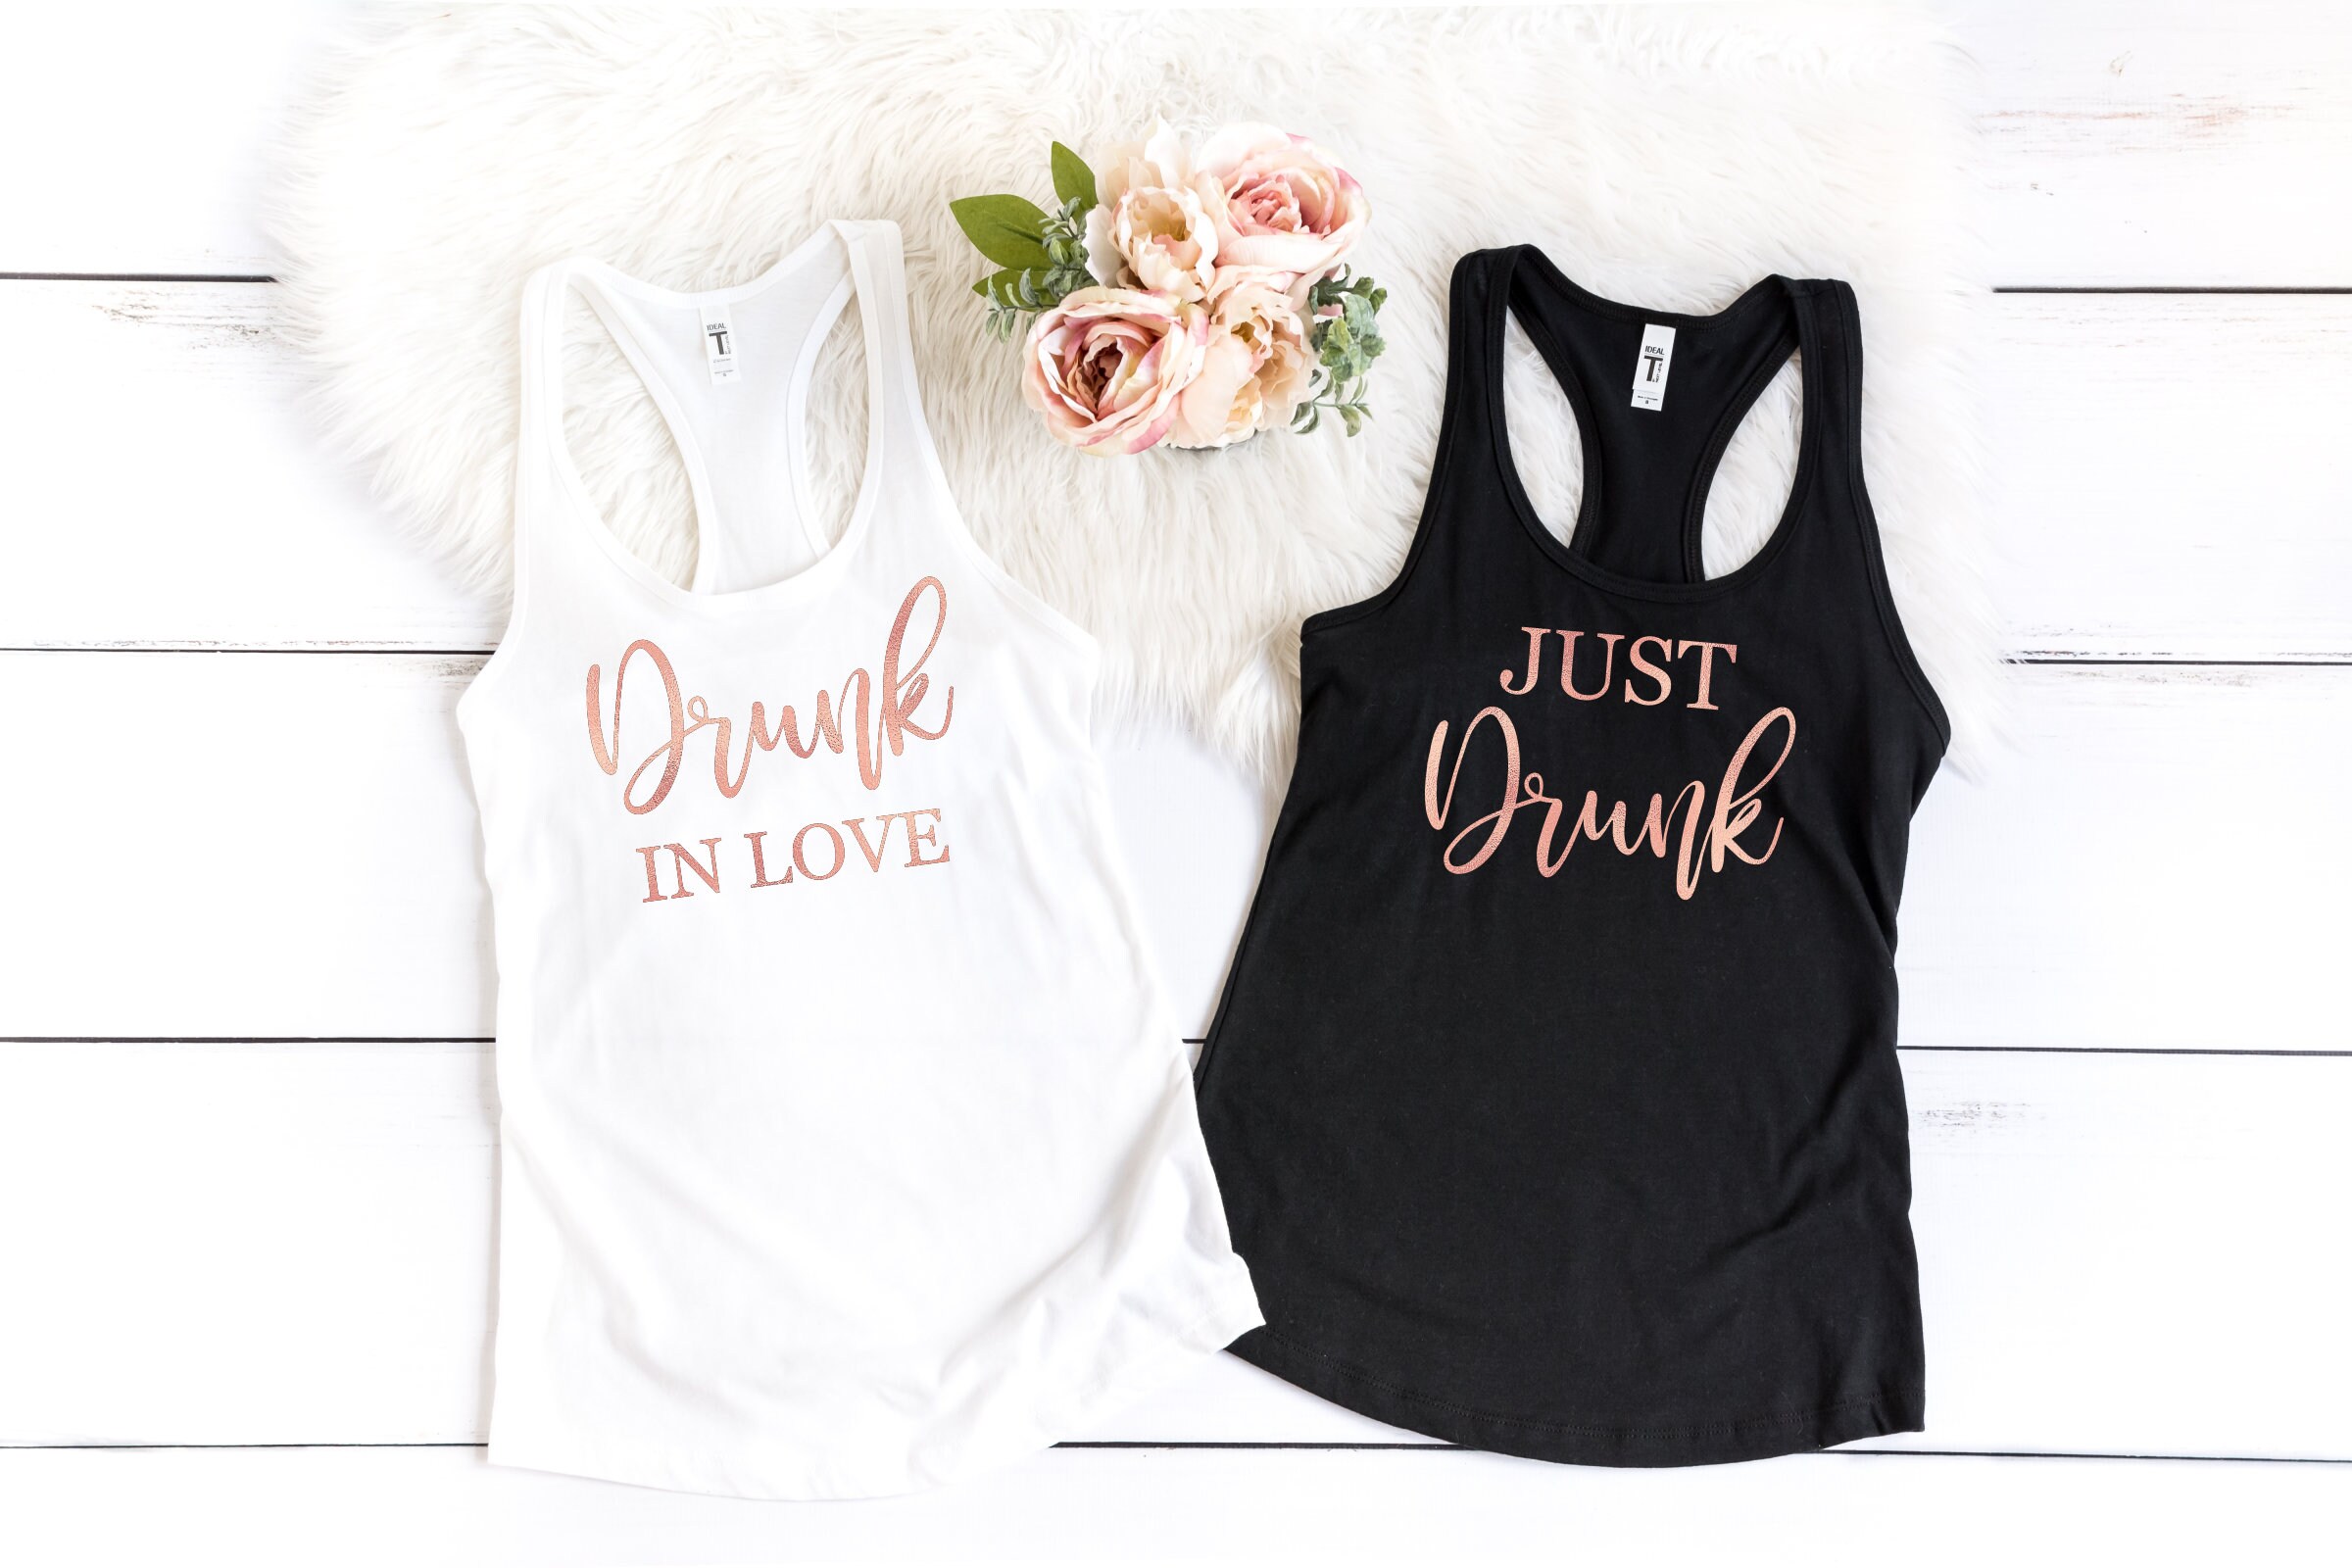 Drunk in Love Just Drunk Tank Top Bachelorette Party Shirt - Etsy